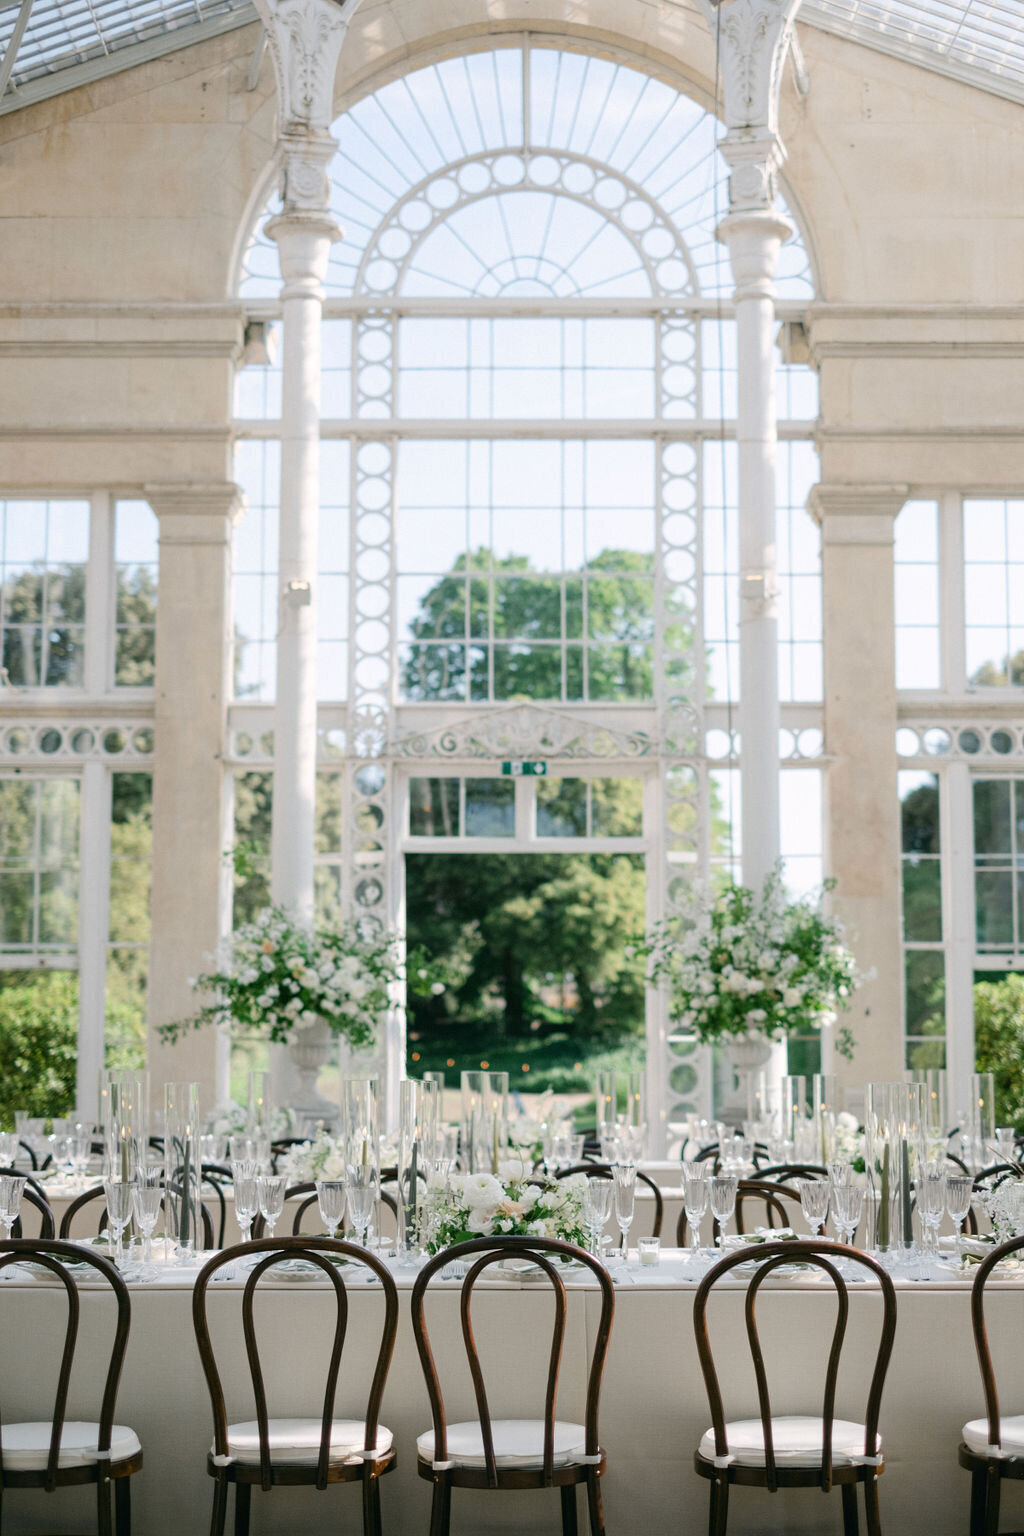 Attabara Studio UK Luxury Wedding Planners at Syon Park & with Charlotte Wise0763